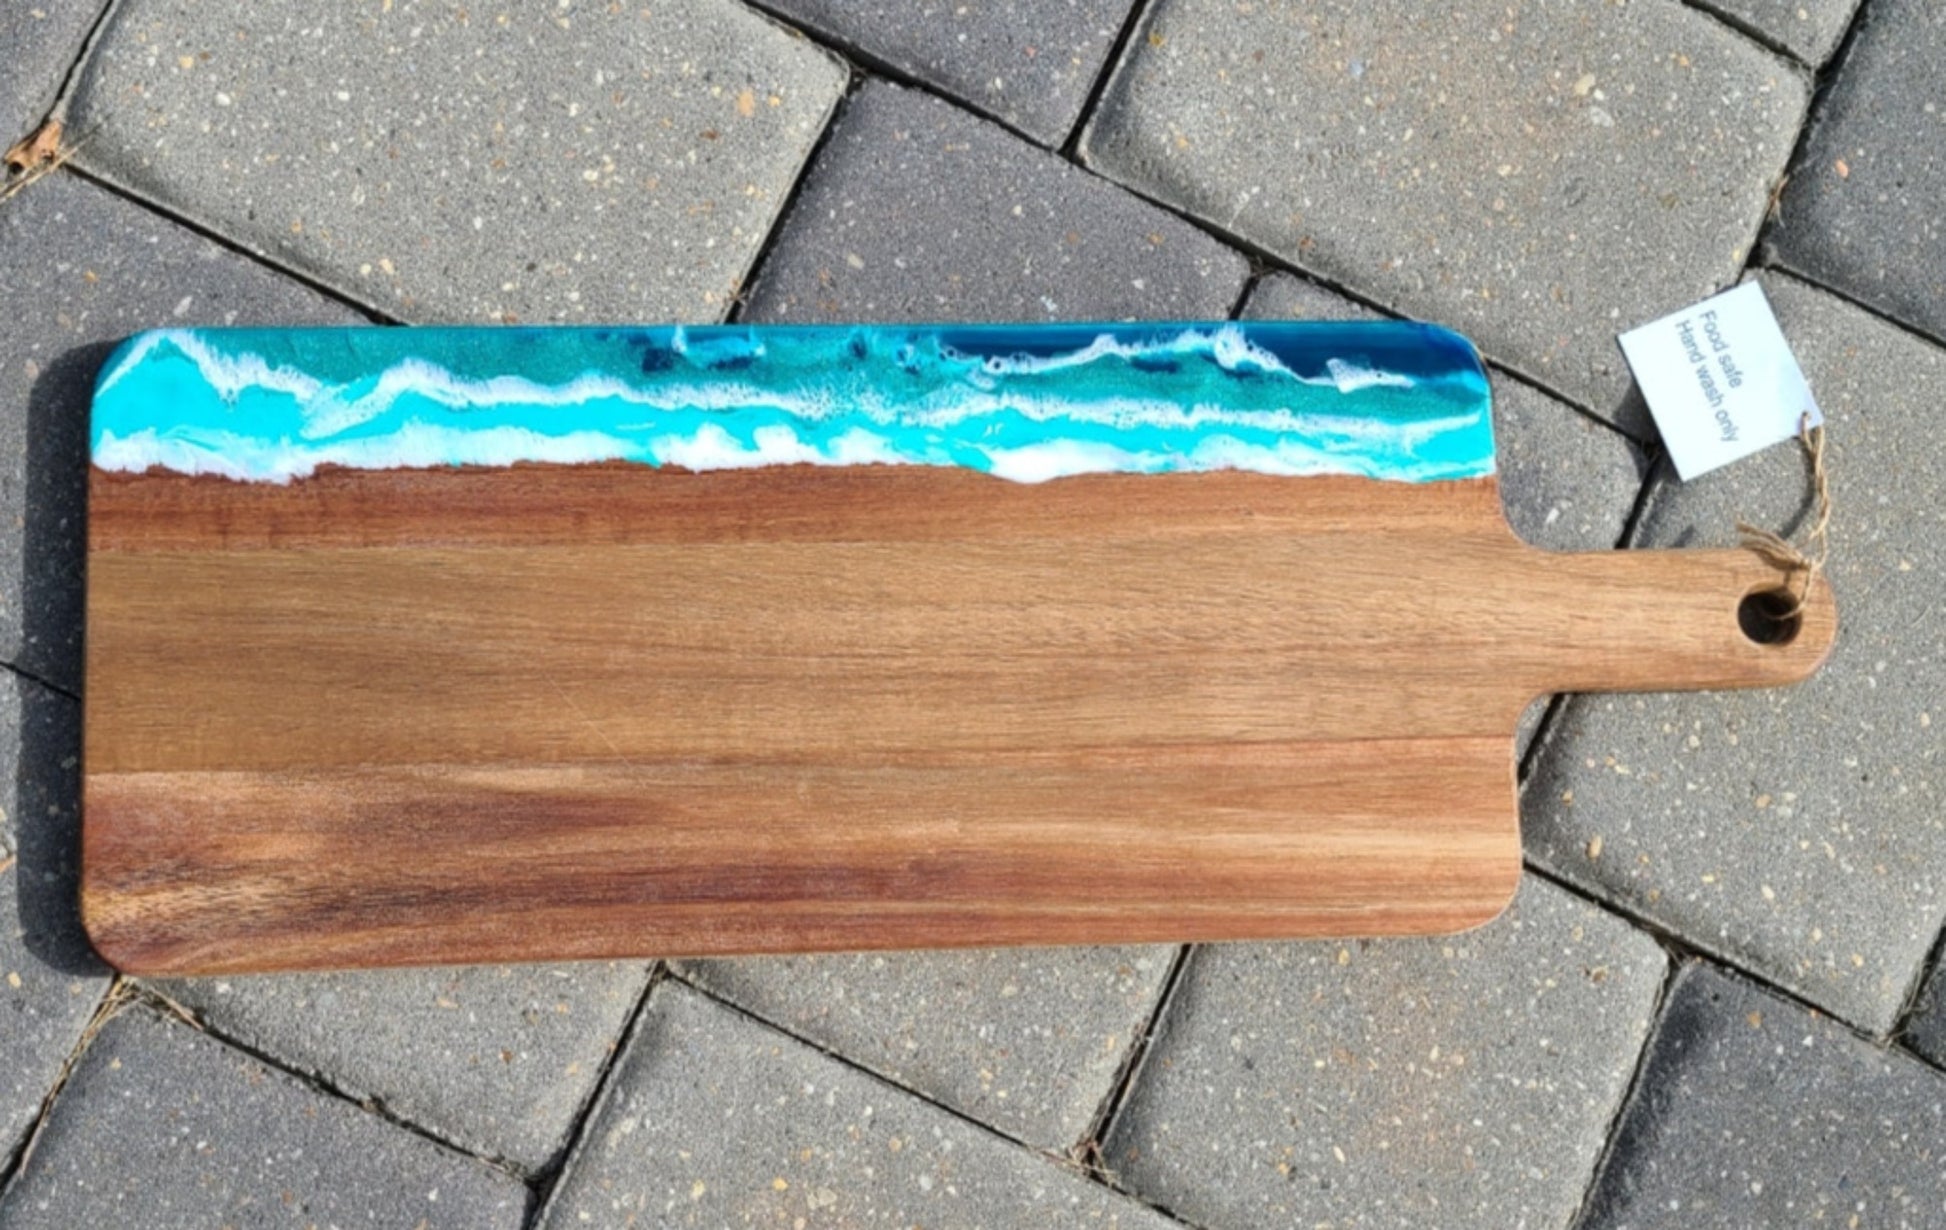 I recently created this cutting board with resin to look like the ocean. I call it "Foamy Ocean" because the water looks like it has lots of foam. Acacia Wood Great gift or reminder of the ocean. Would make a beautiful charcuterie board. Food safe wood and resin Care: Wipe with a damp cloth or resin can be clean with an alcohol wipe.  Occasionally, treat the wood with Food Safe Mineral Spirits or Olive Oil. Approximate size: 20.5 inches long; 7.5 inches wide; .5 inches thick